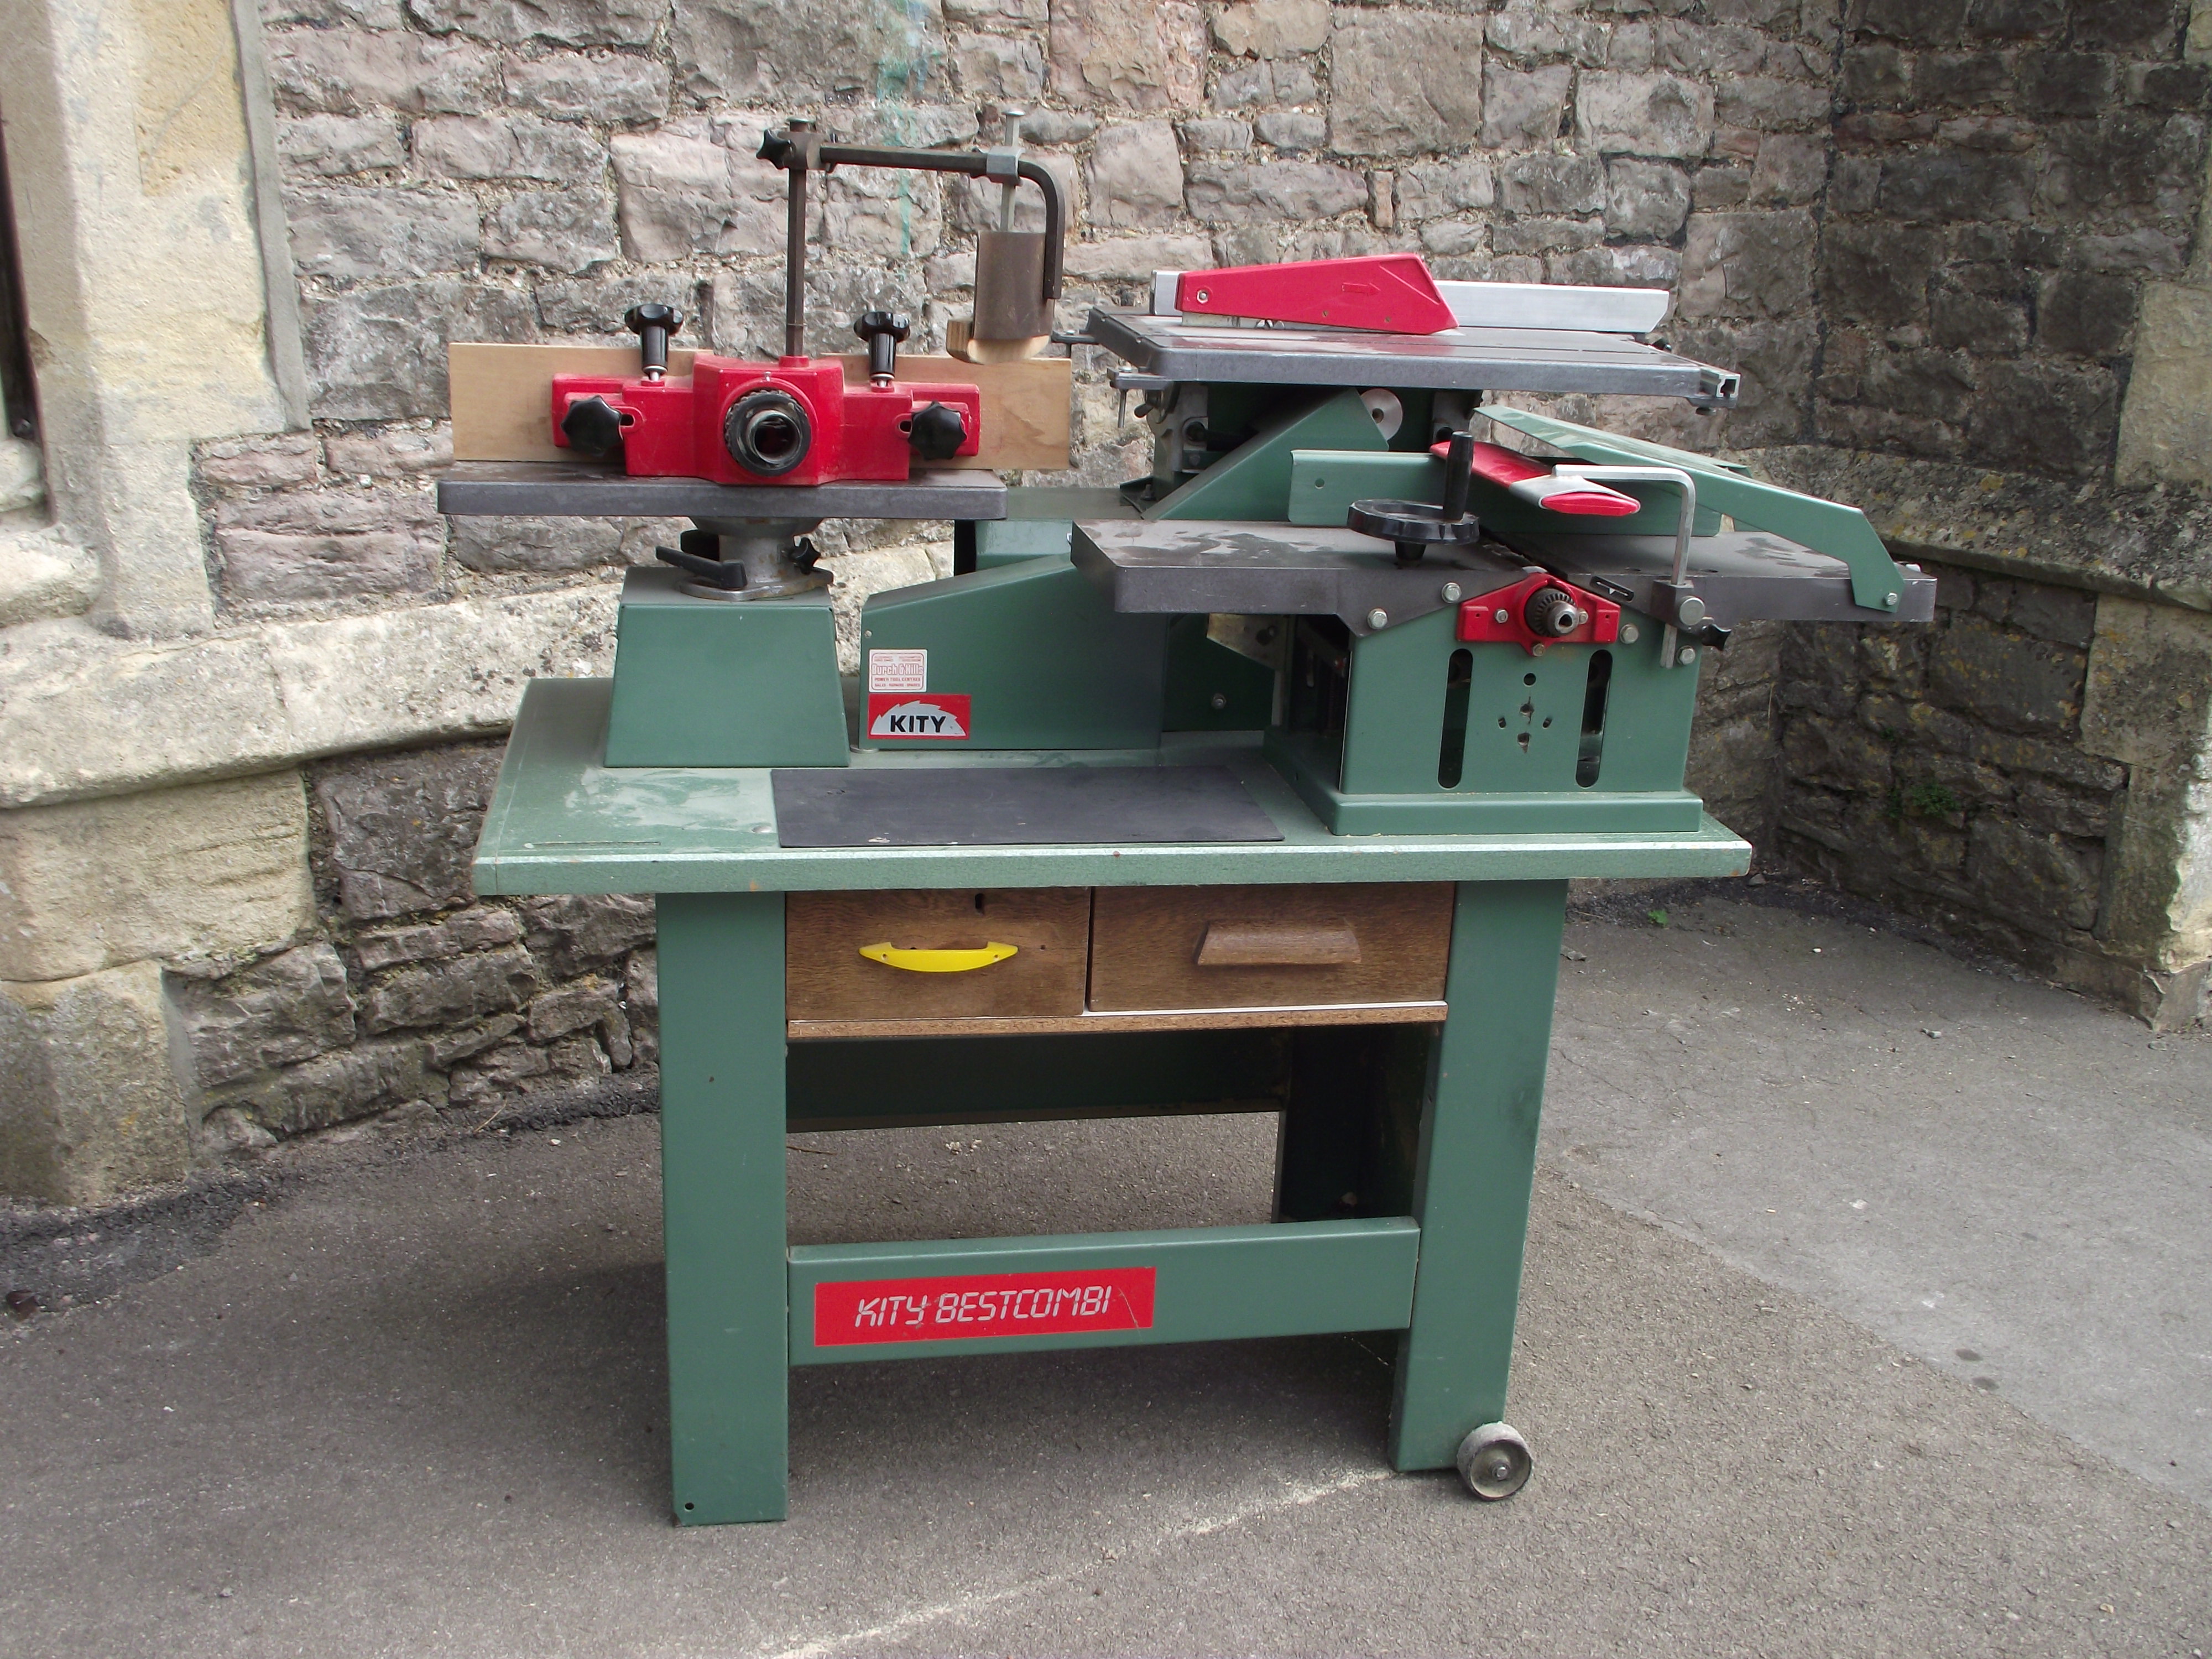 A contemporary workshop multi woodworking machine, Kity BestCombi, with spindle moulder, morticer